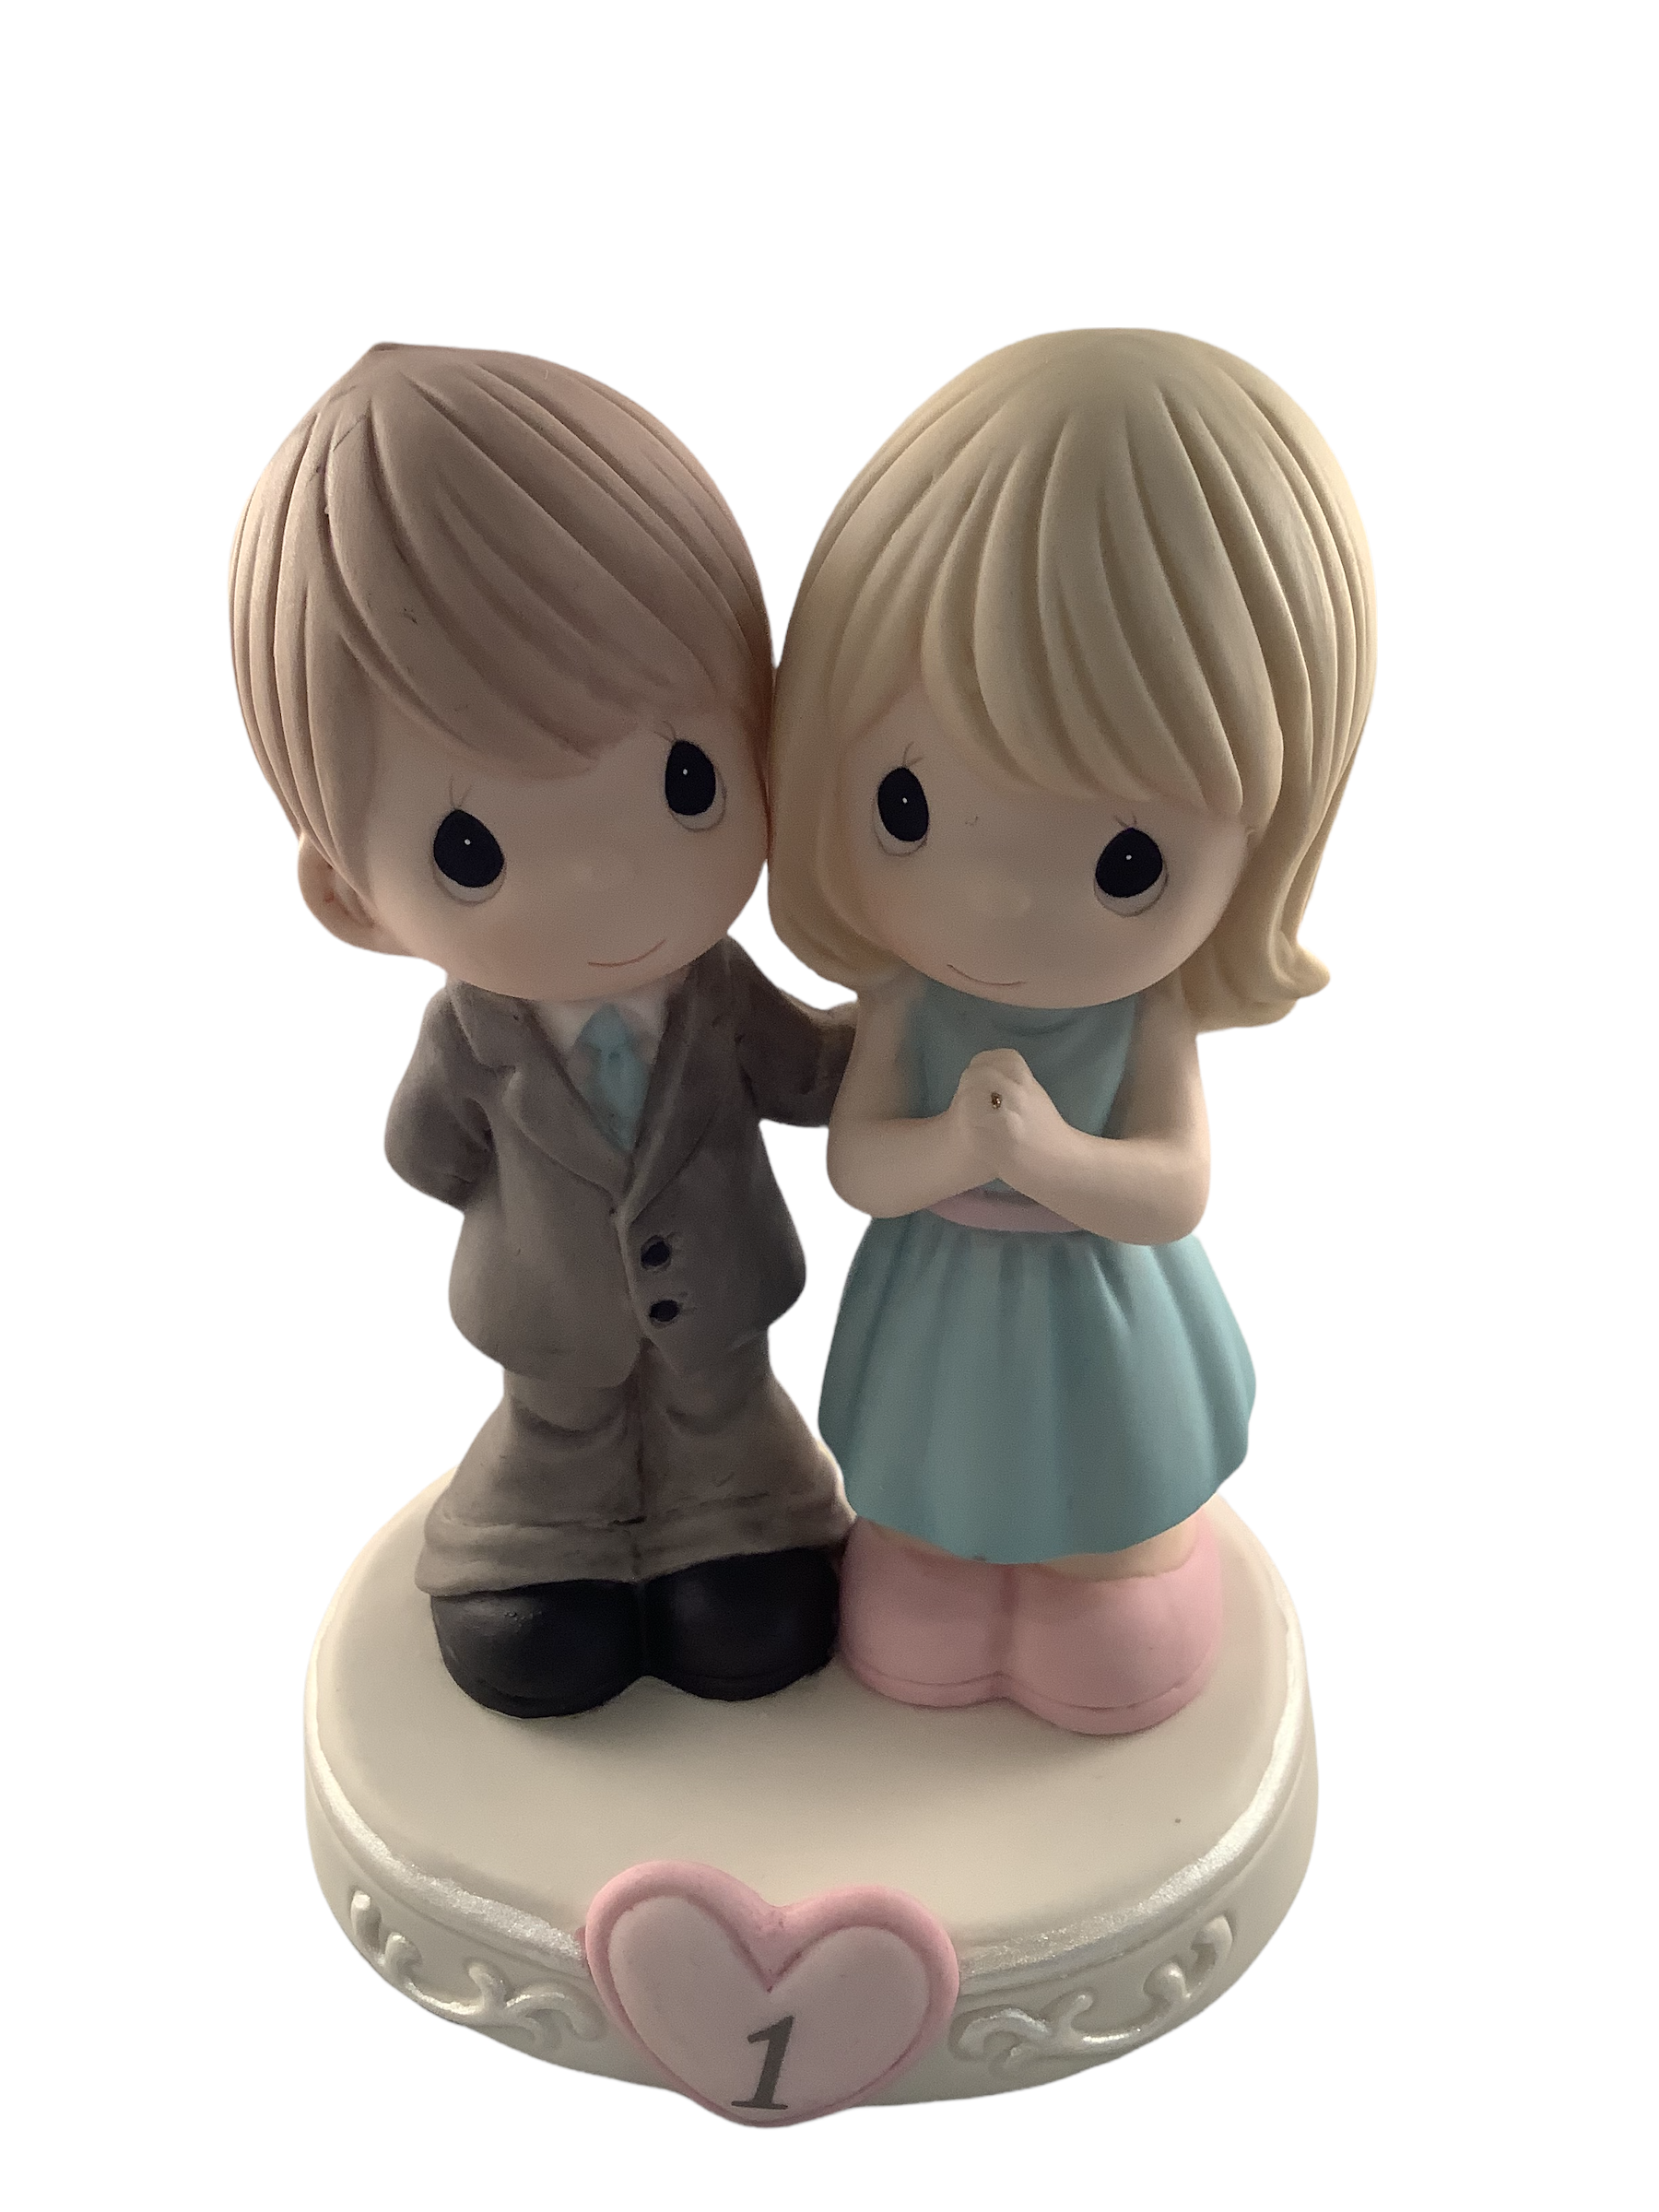 Through The Years (1st) - Precious Moment Figurine